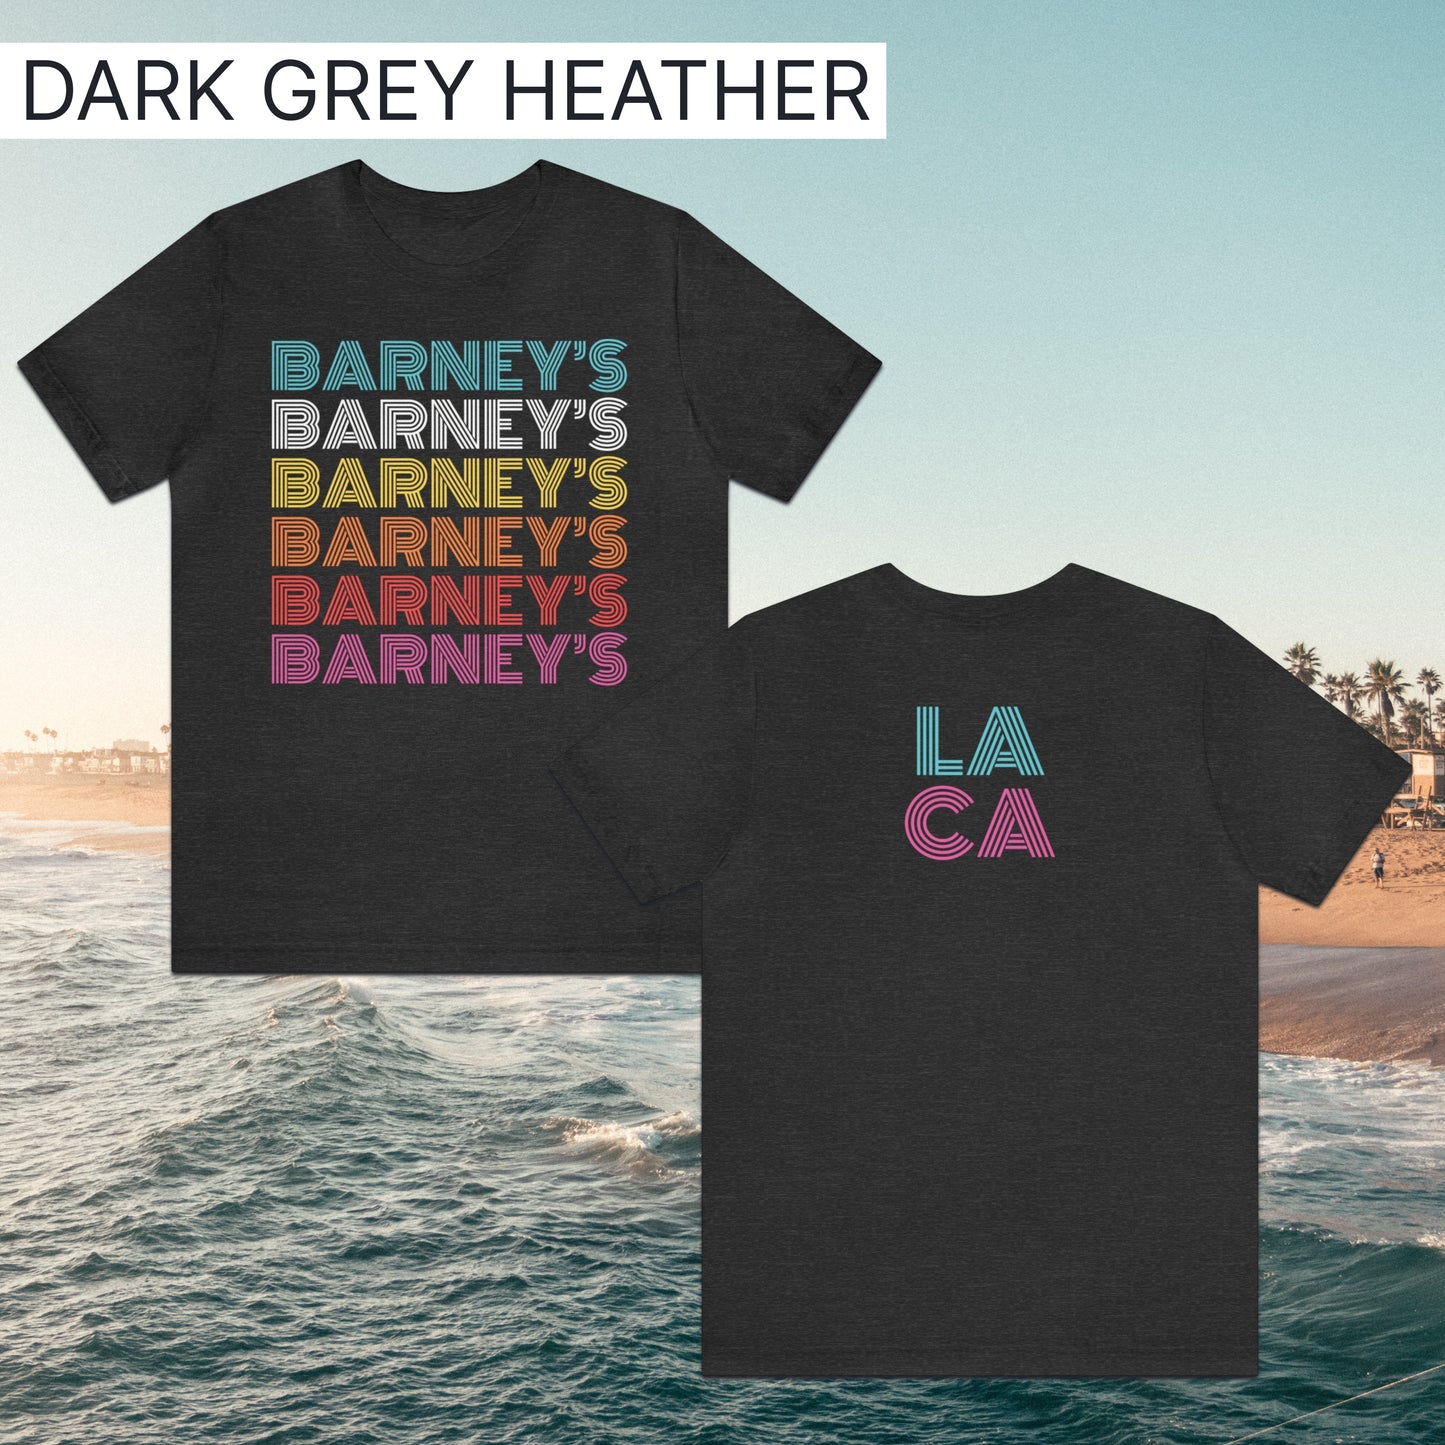 Barney's x6 Retro Hollywood | BARNEY'S BEANERY - Men's Retro Graphic Tee | Dark Grey Heather Bella+Canvas 3001 T-Shirt - Front And Back Flat Lay View